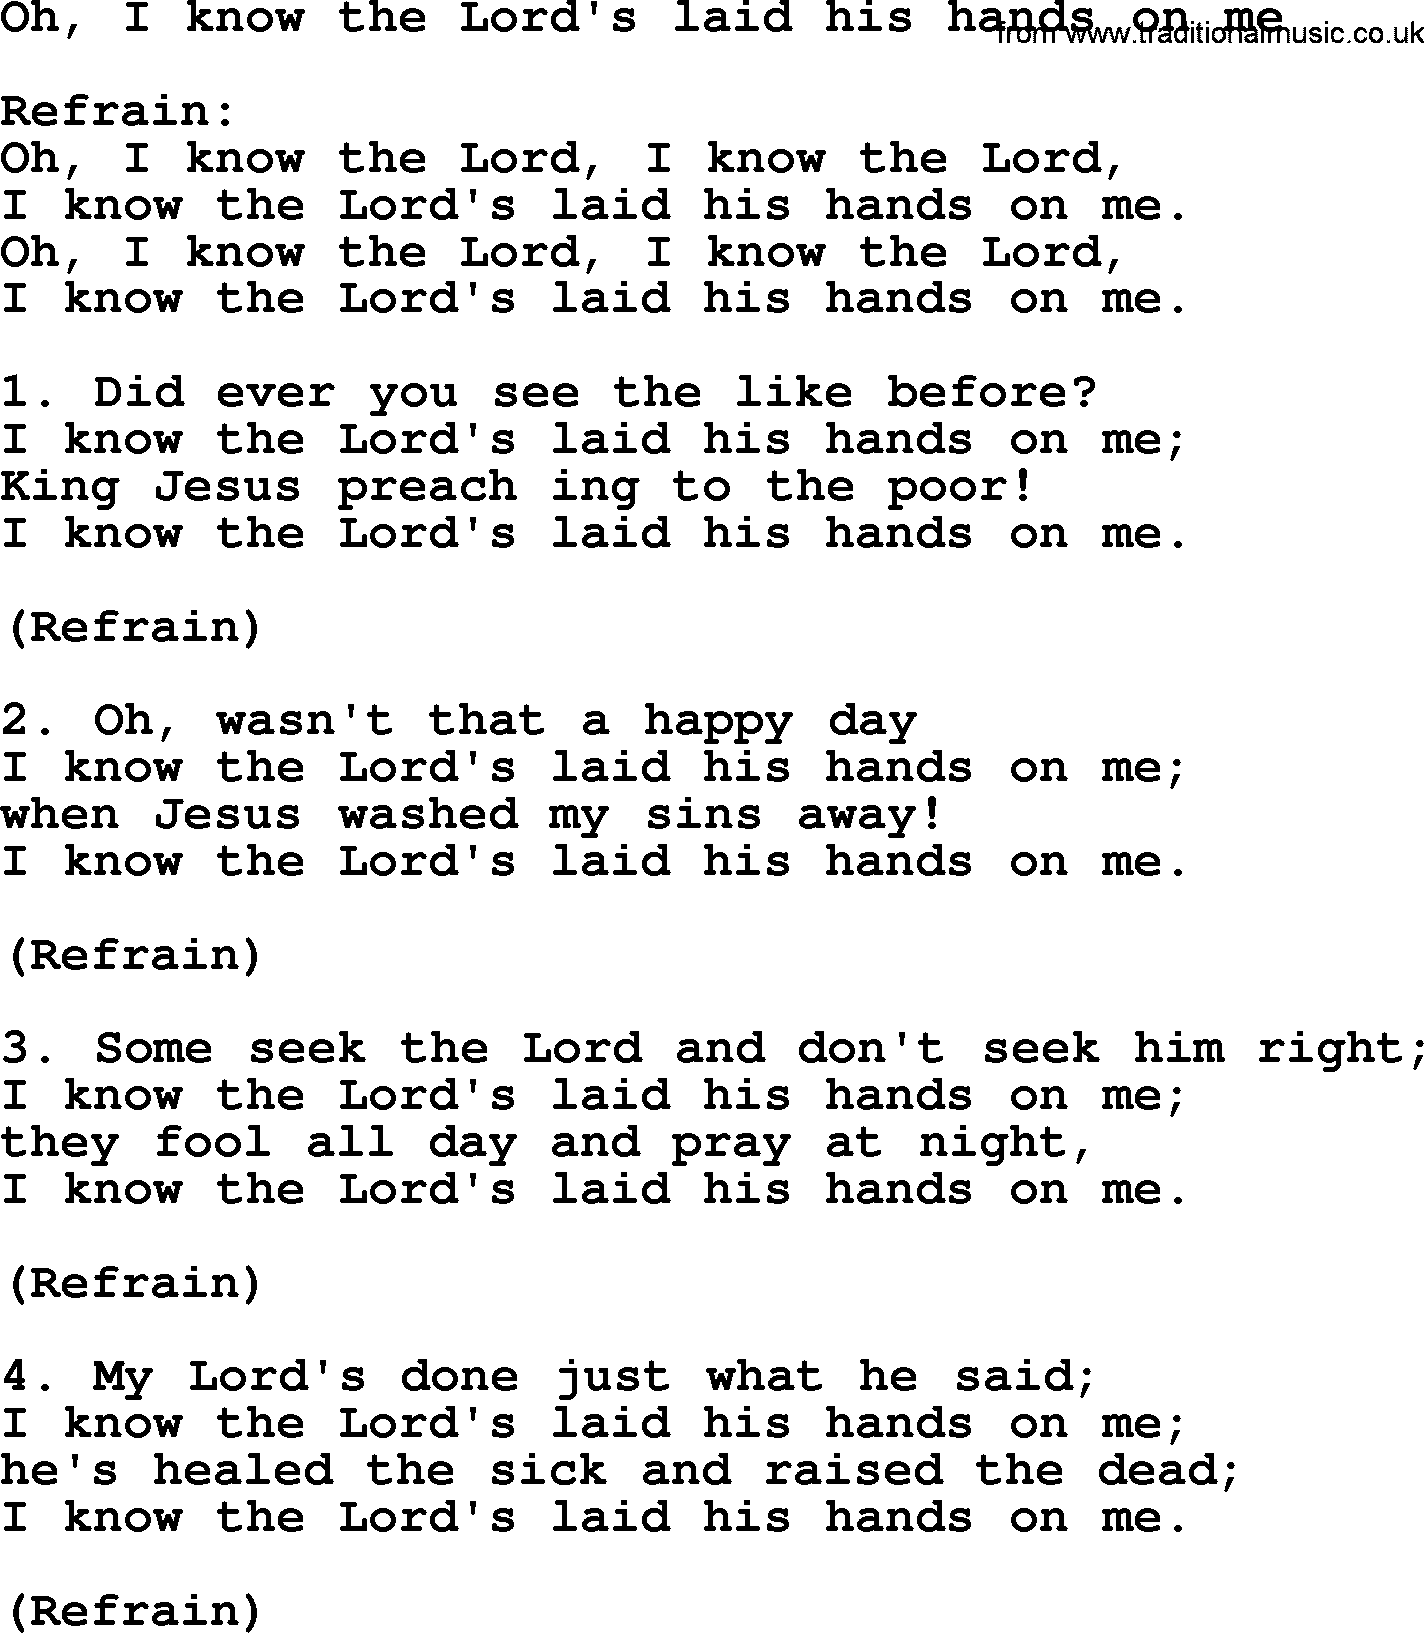 Presbyterian Hymns collection, Hymn: Oh, I Know The Lord's Laid His Hands On Me, lyrics and PDF